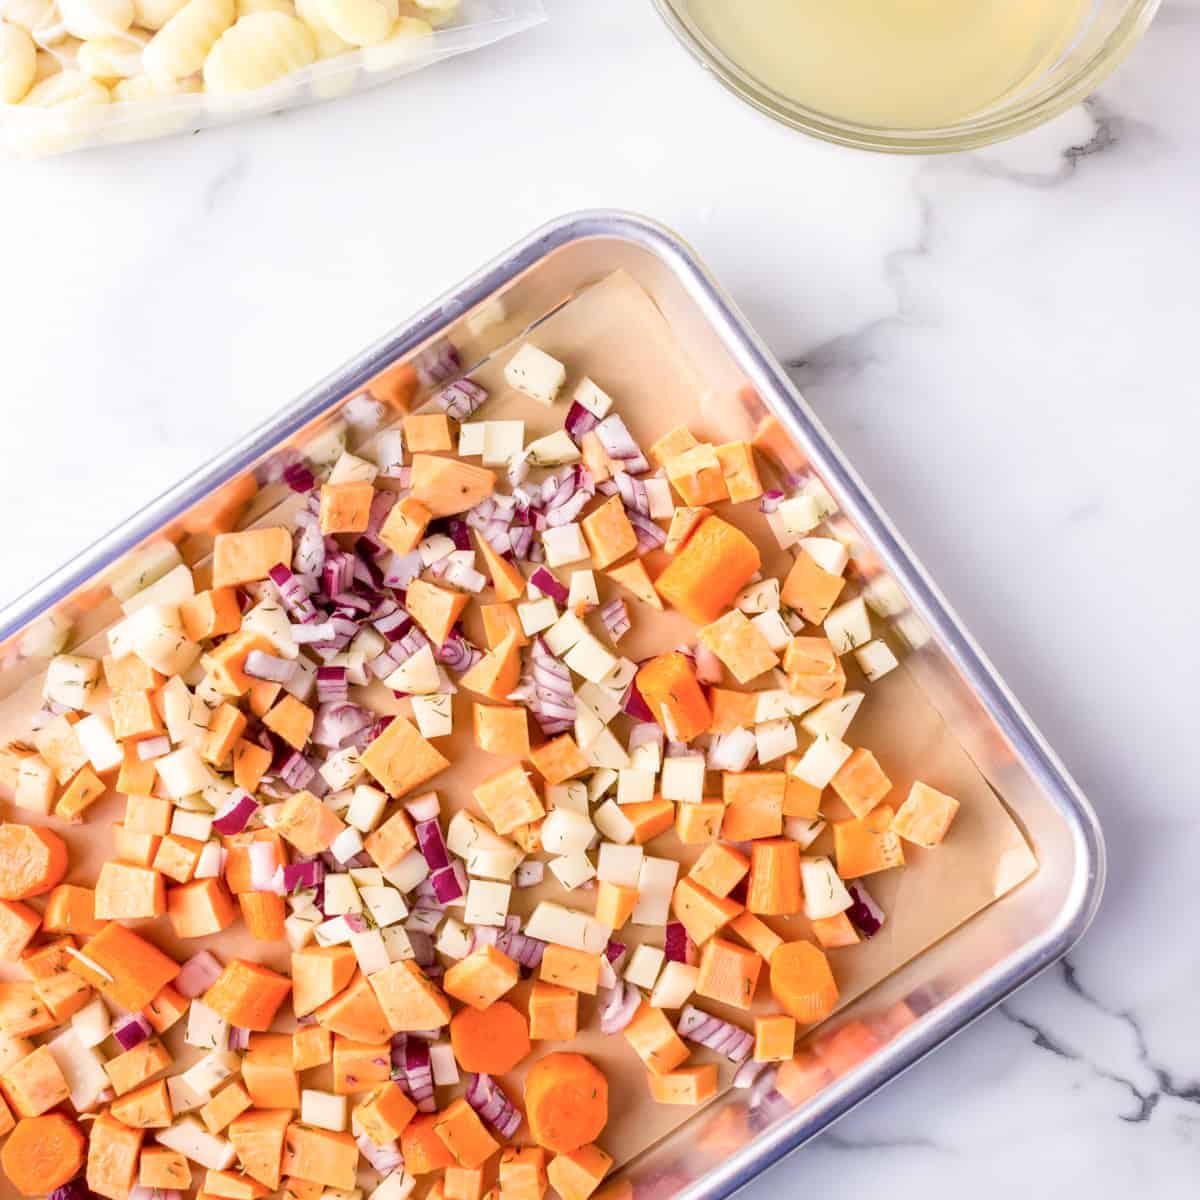 Diced vegetables on a sheet pan.